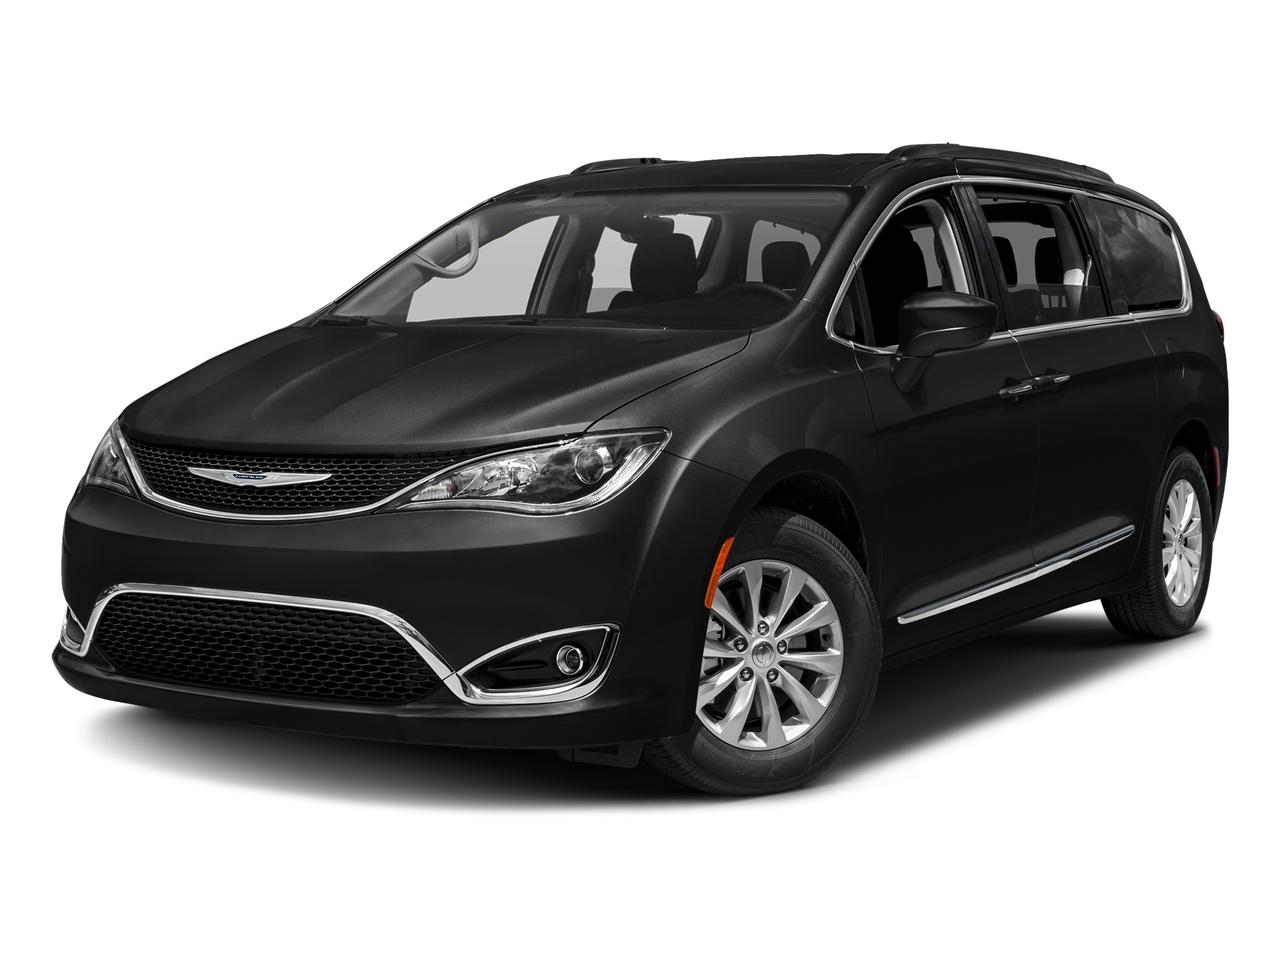 2017 Chrysler Pacifica Vehicle Photo in Appleton, WI 54913